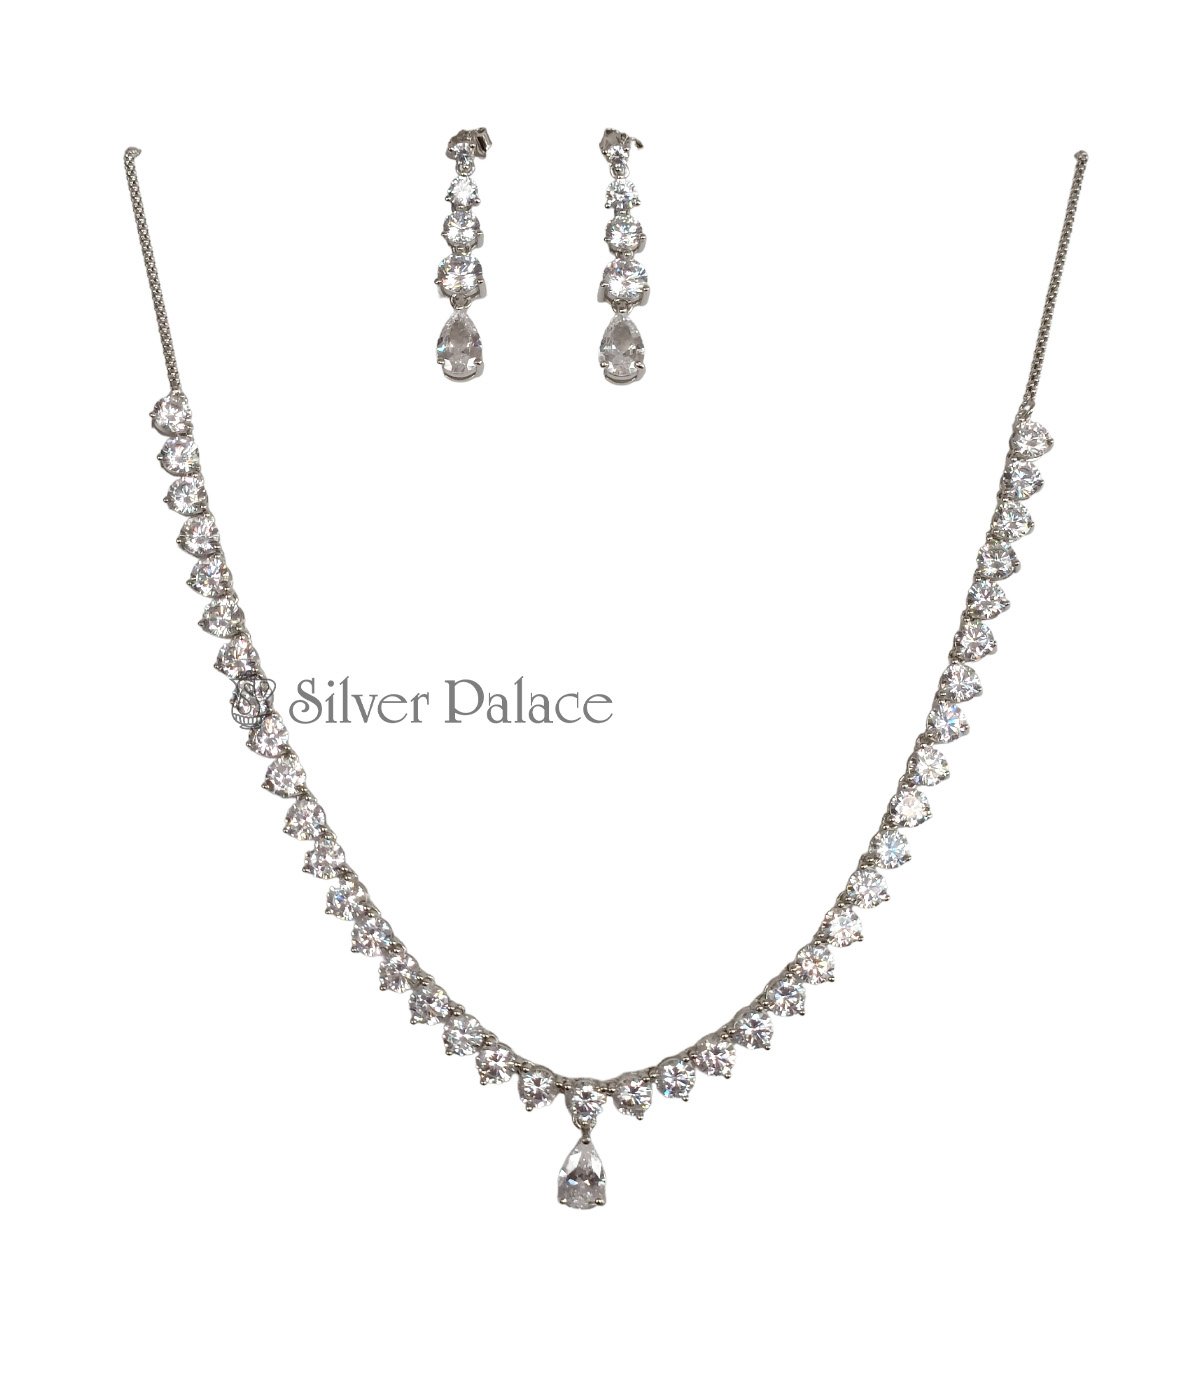 Spinal Naksi Trunk Silver Necklace For Women - Silver Palace